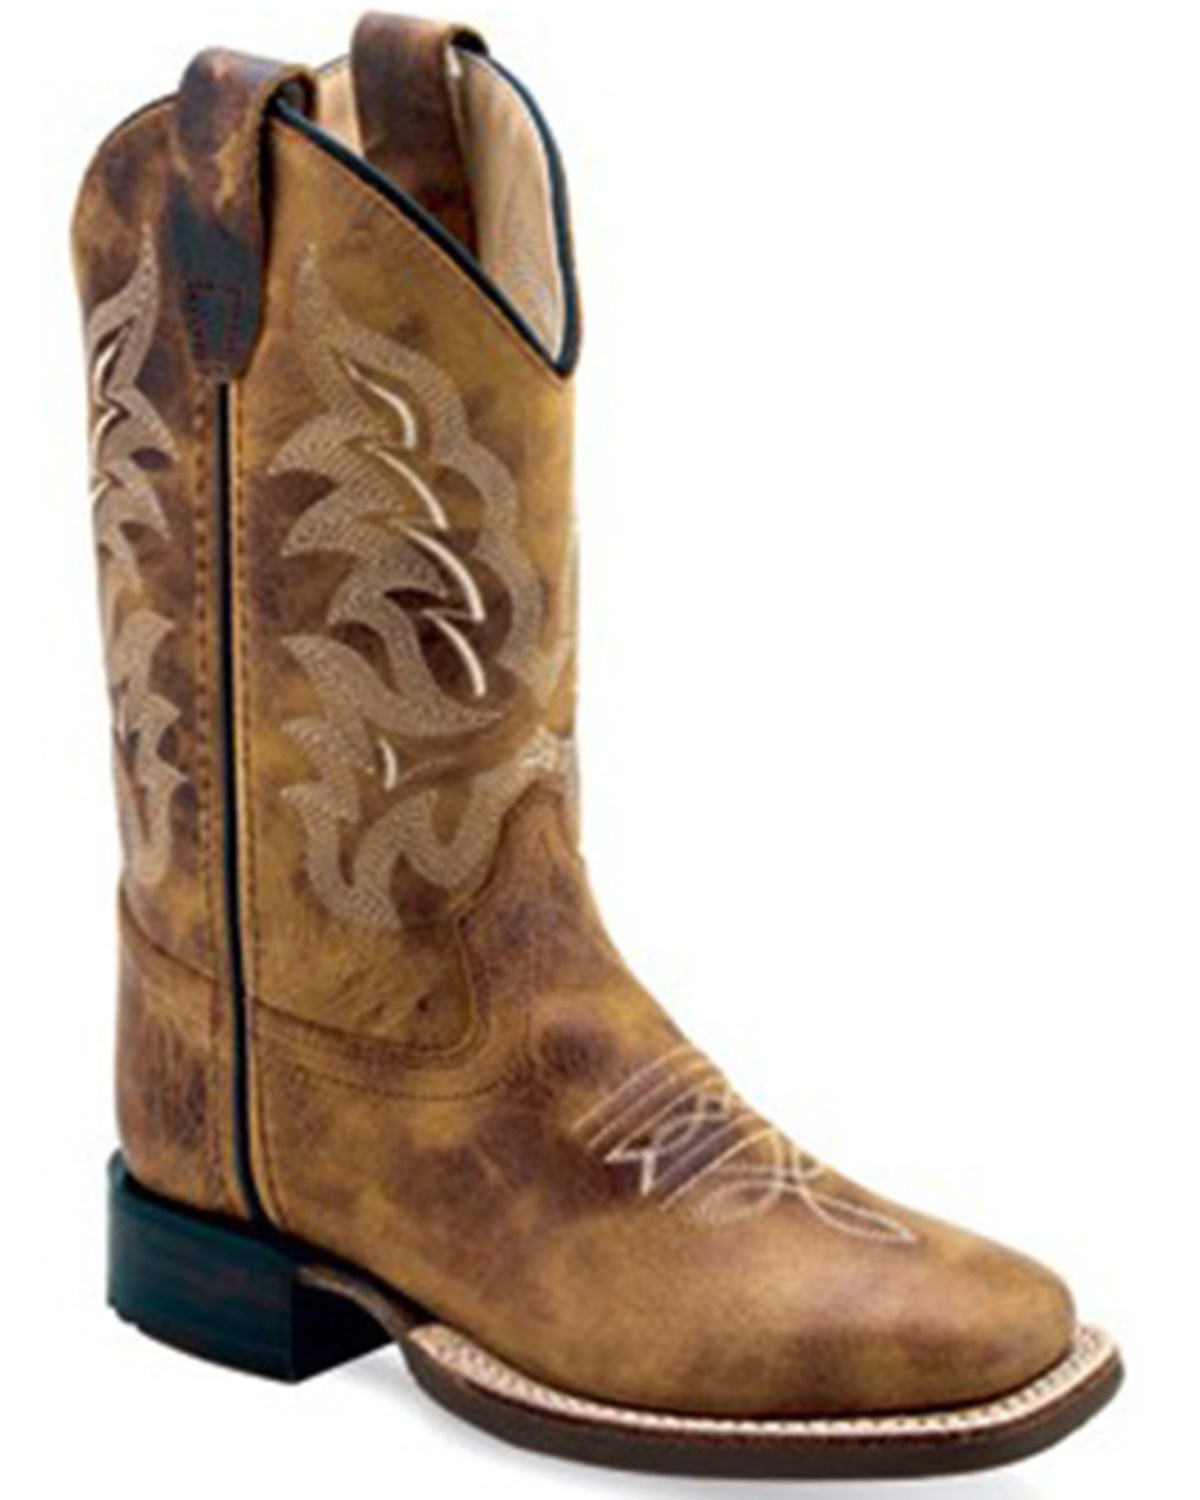 Old West Girls' Western Boots - Square Toe